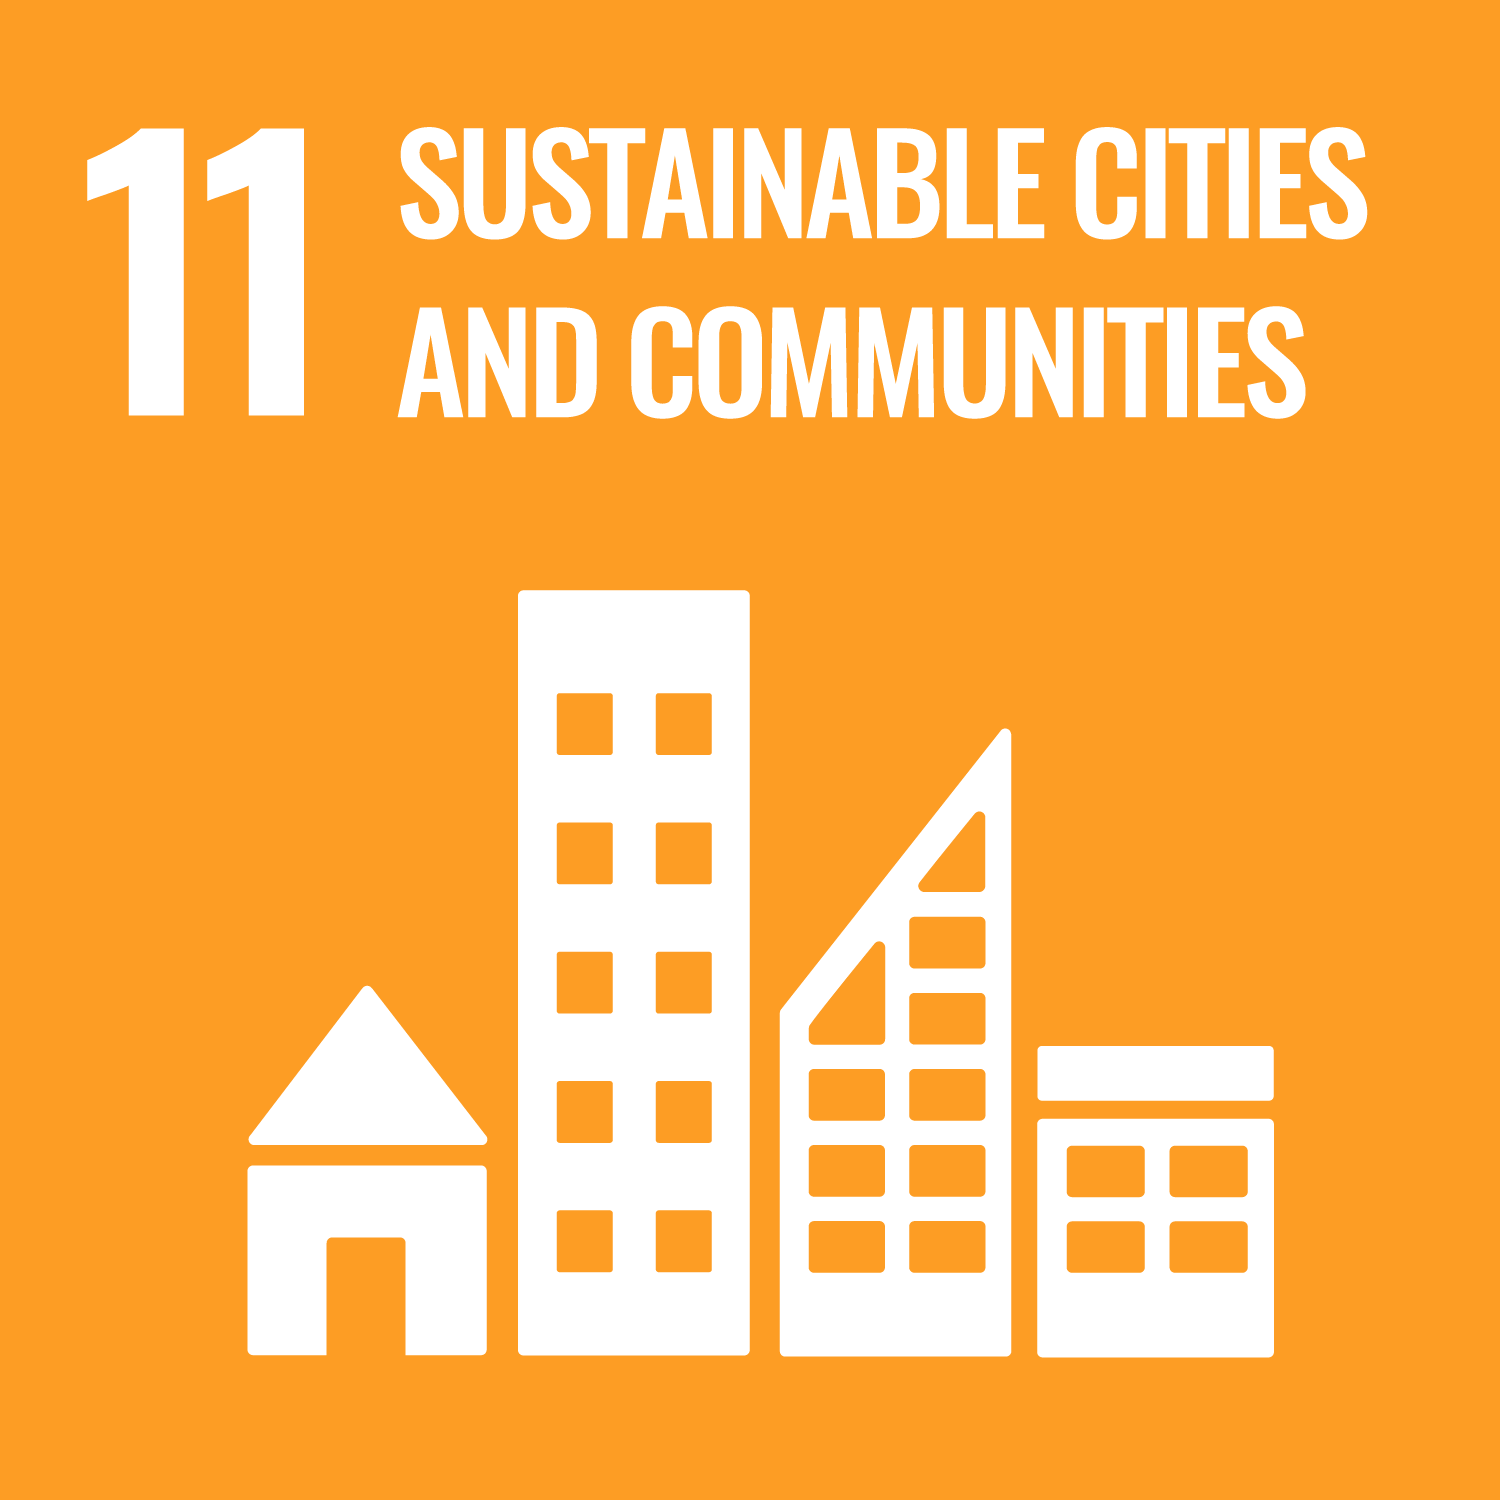 UN Sustainable goal - Sustainable Cities and Communities